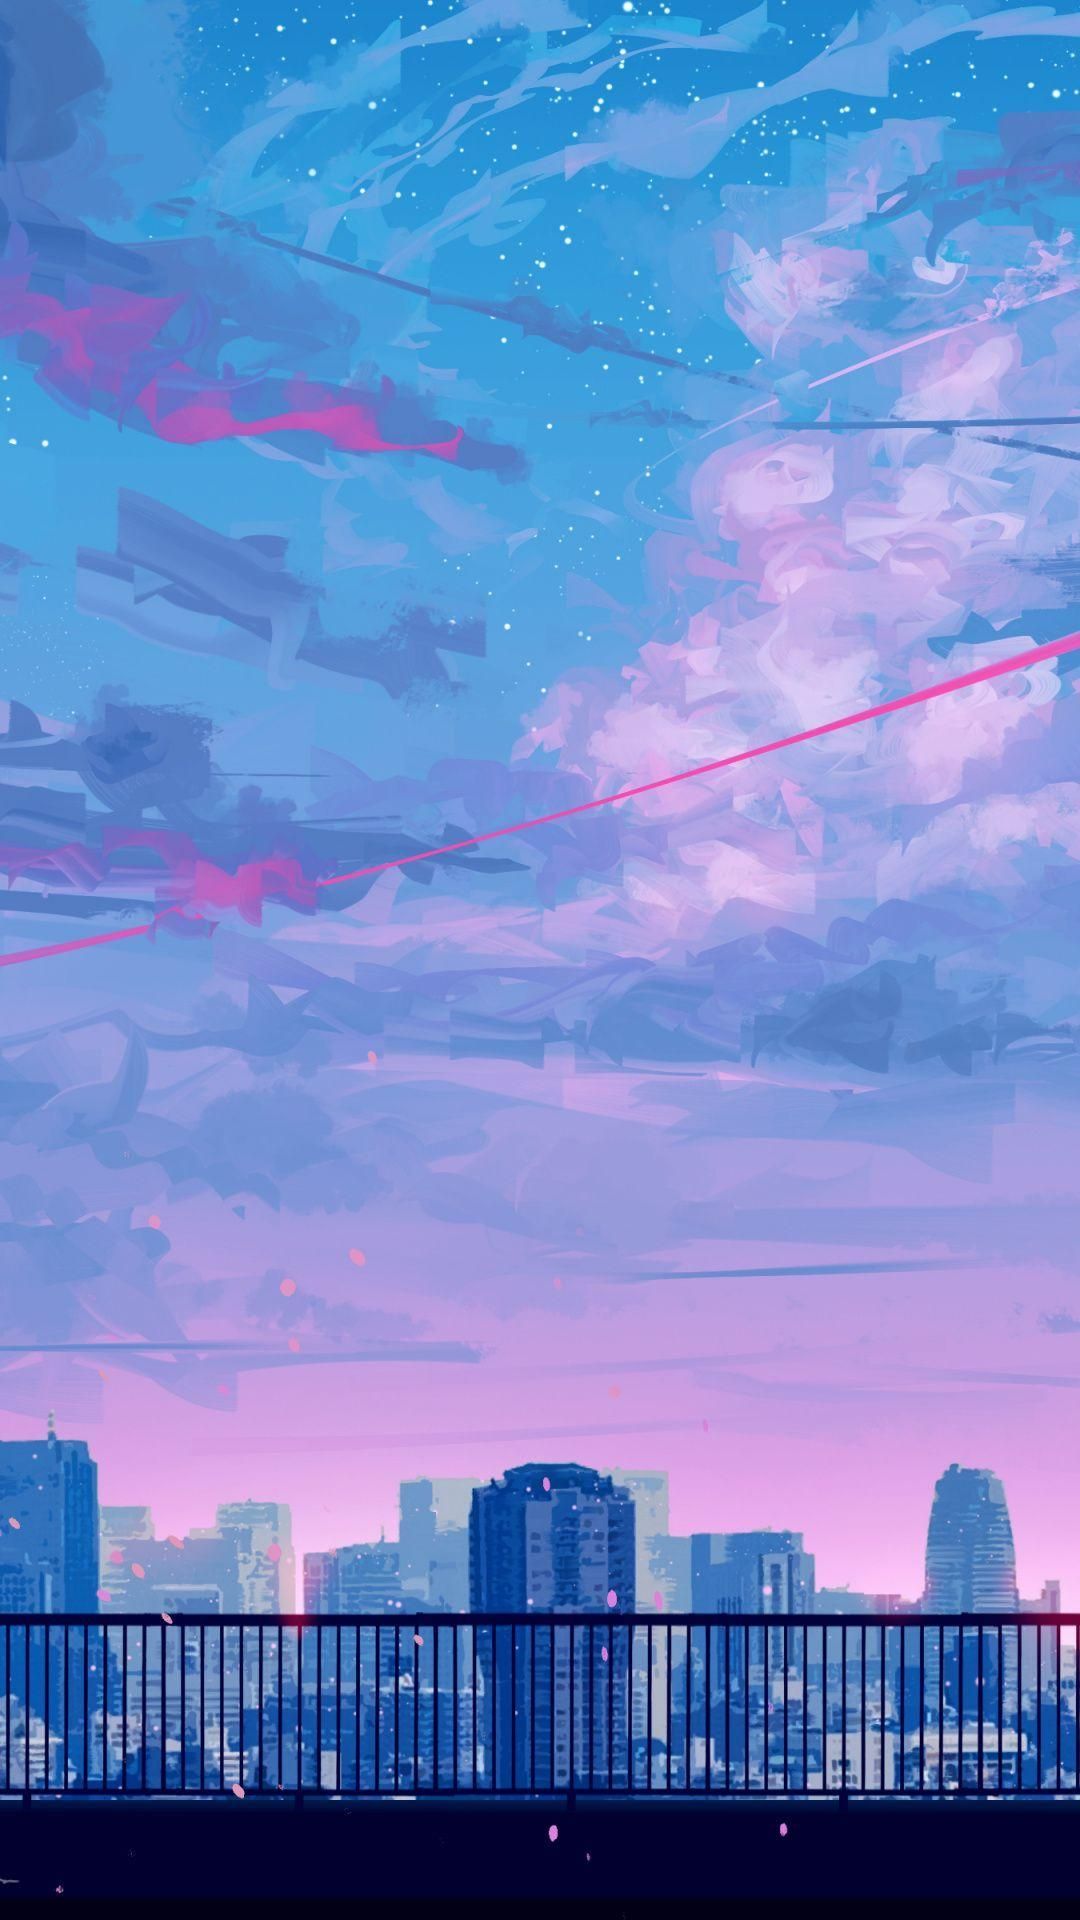 Aesthetic Pink And Blue Background Picture. Scenery